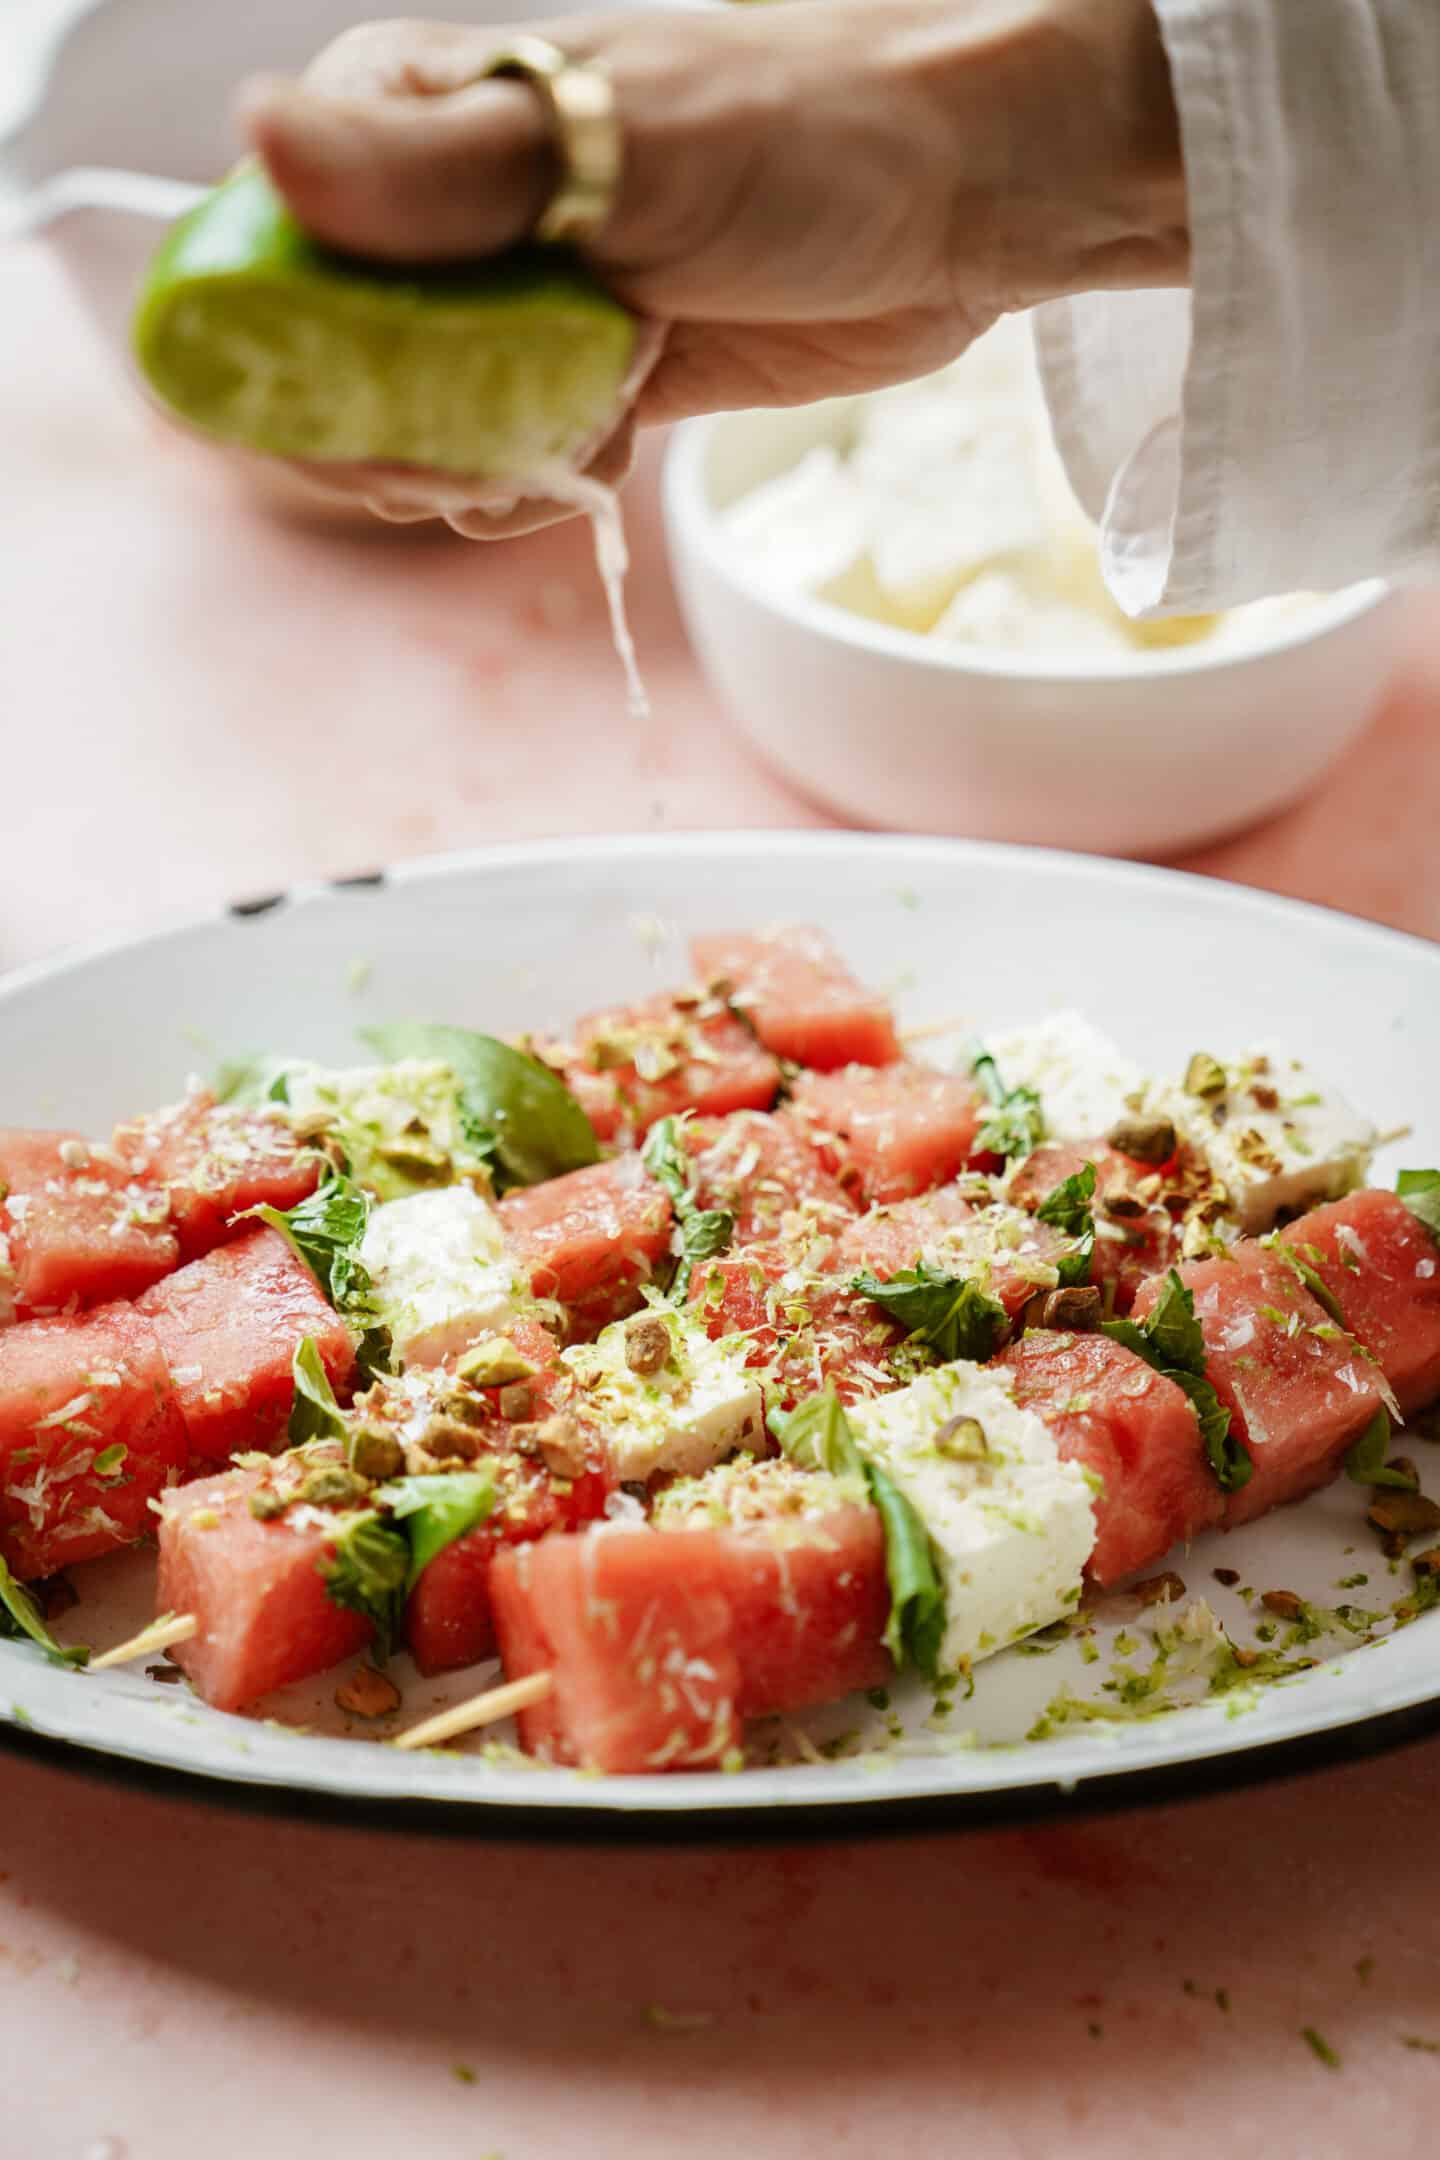 Watermelon skewers on a plate, a great summer appetizer